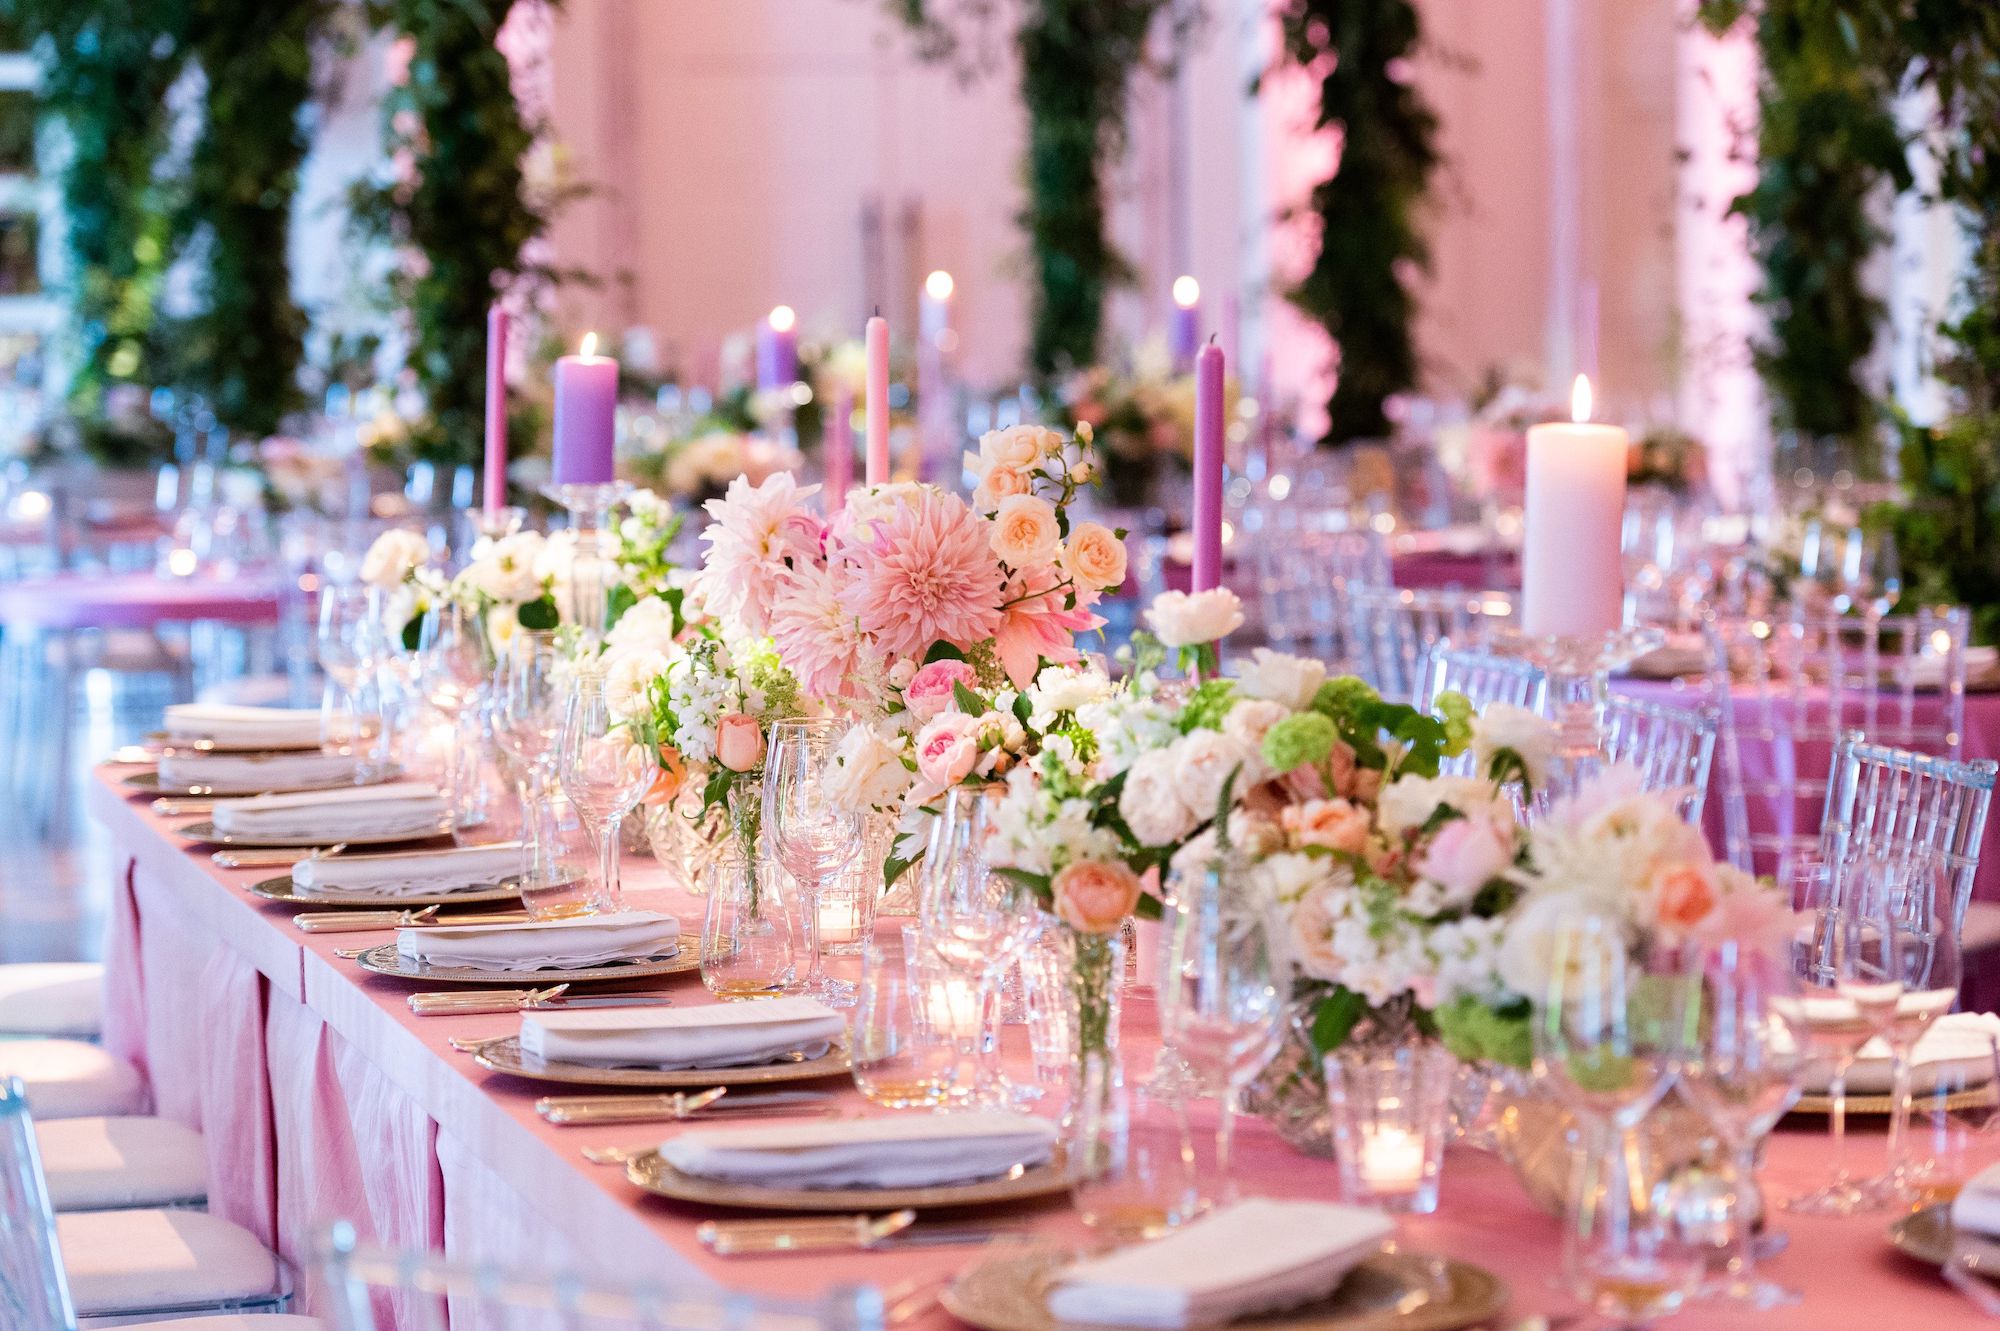 How to Set a Wedding Tabletop